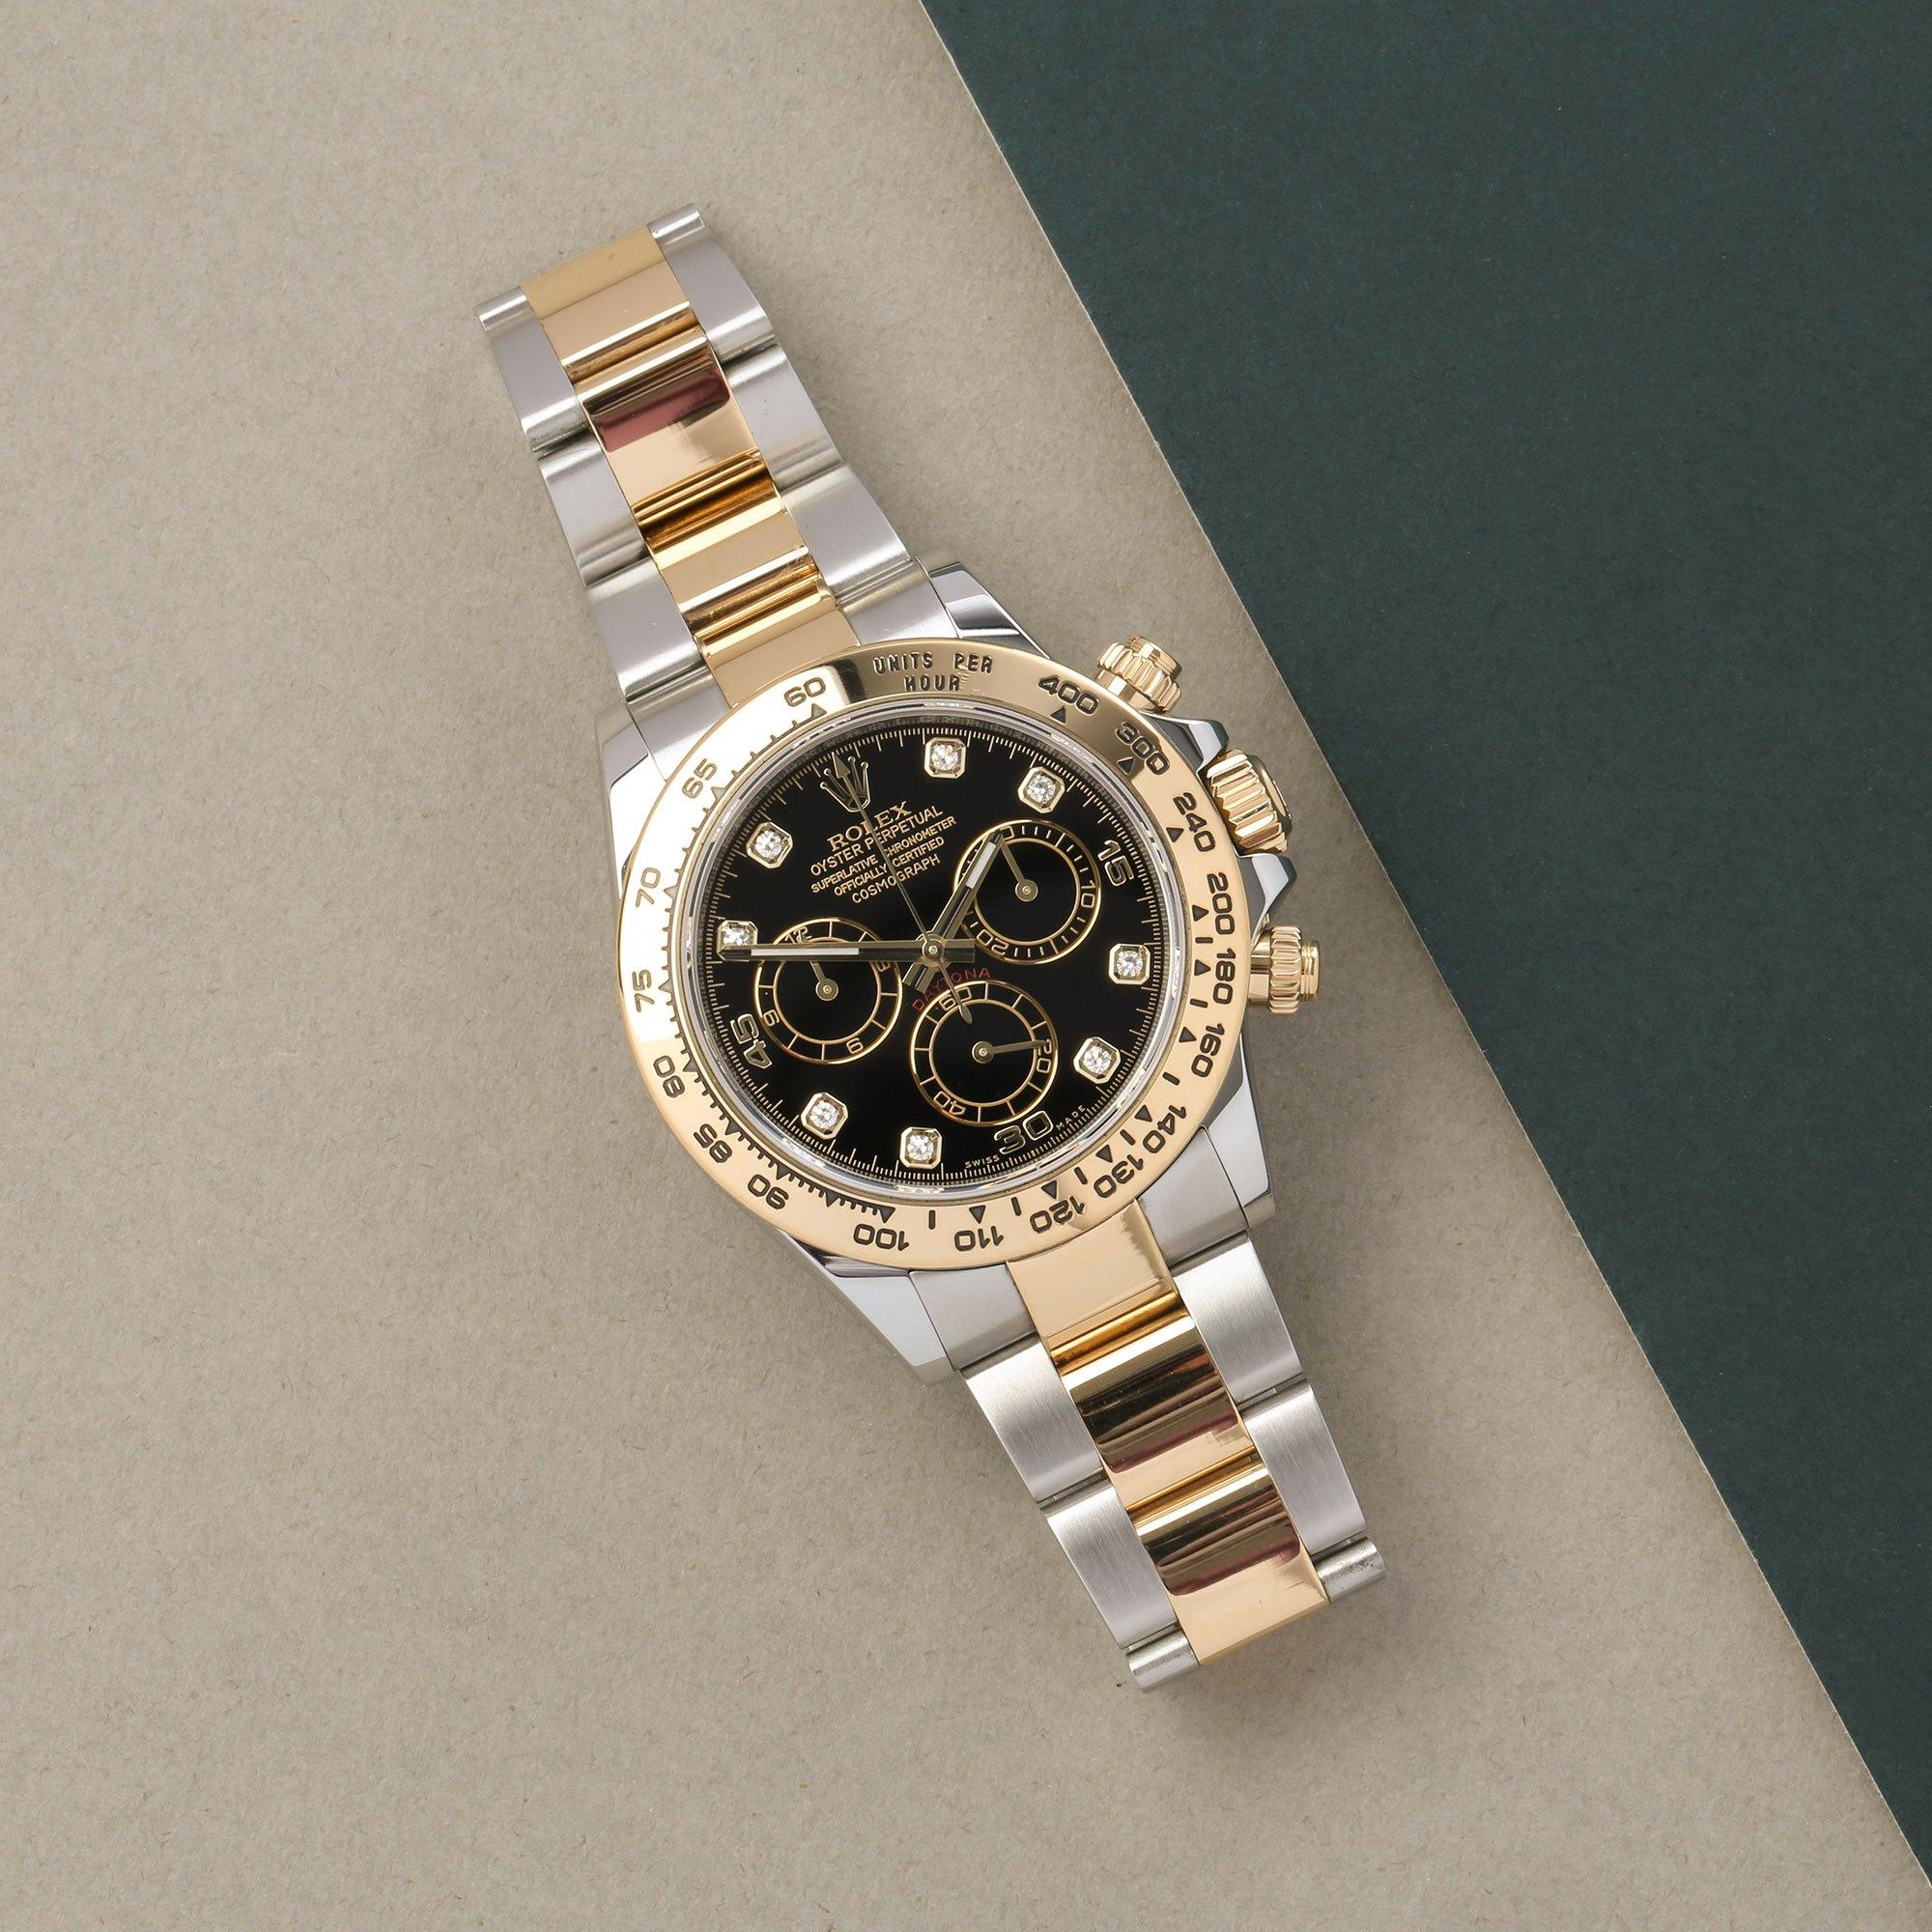 Xupes Reference: COM002667
Manufacturer: Rolex
Model: Daytona
Model Variant: 0
Model Number: 116503
Age: 30-07-2018
Gender: Men
Complete With: Rolex Box, Manuals, Guarantee, Hand Tag, Card Holder & Guarantee Card 
Dial: Black Diamond
Glass: Sapphire